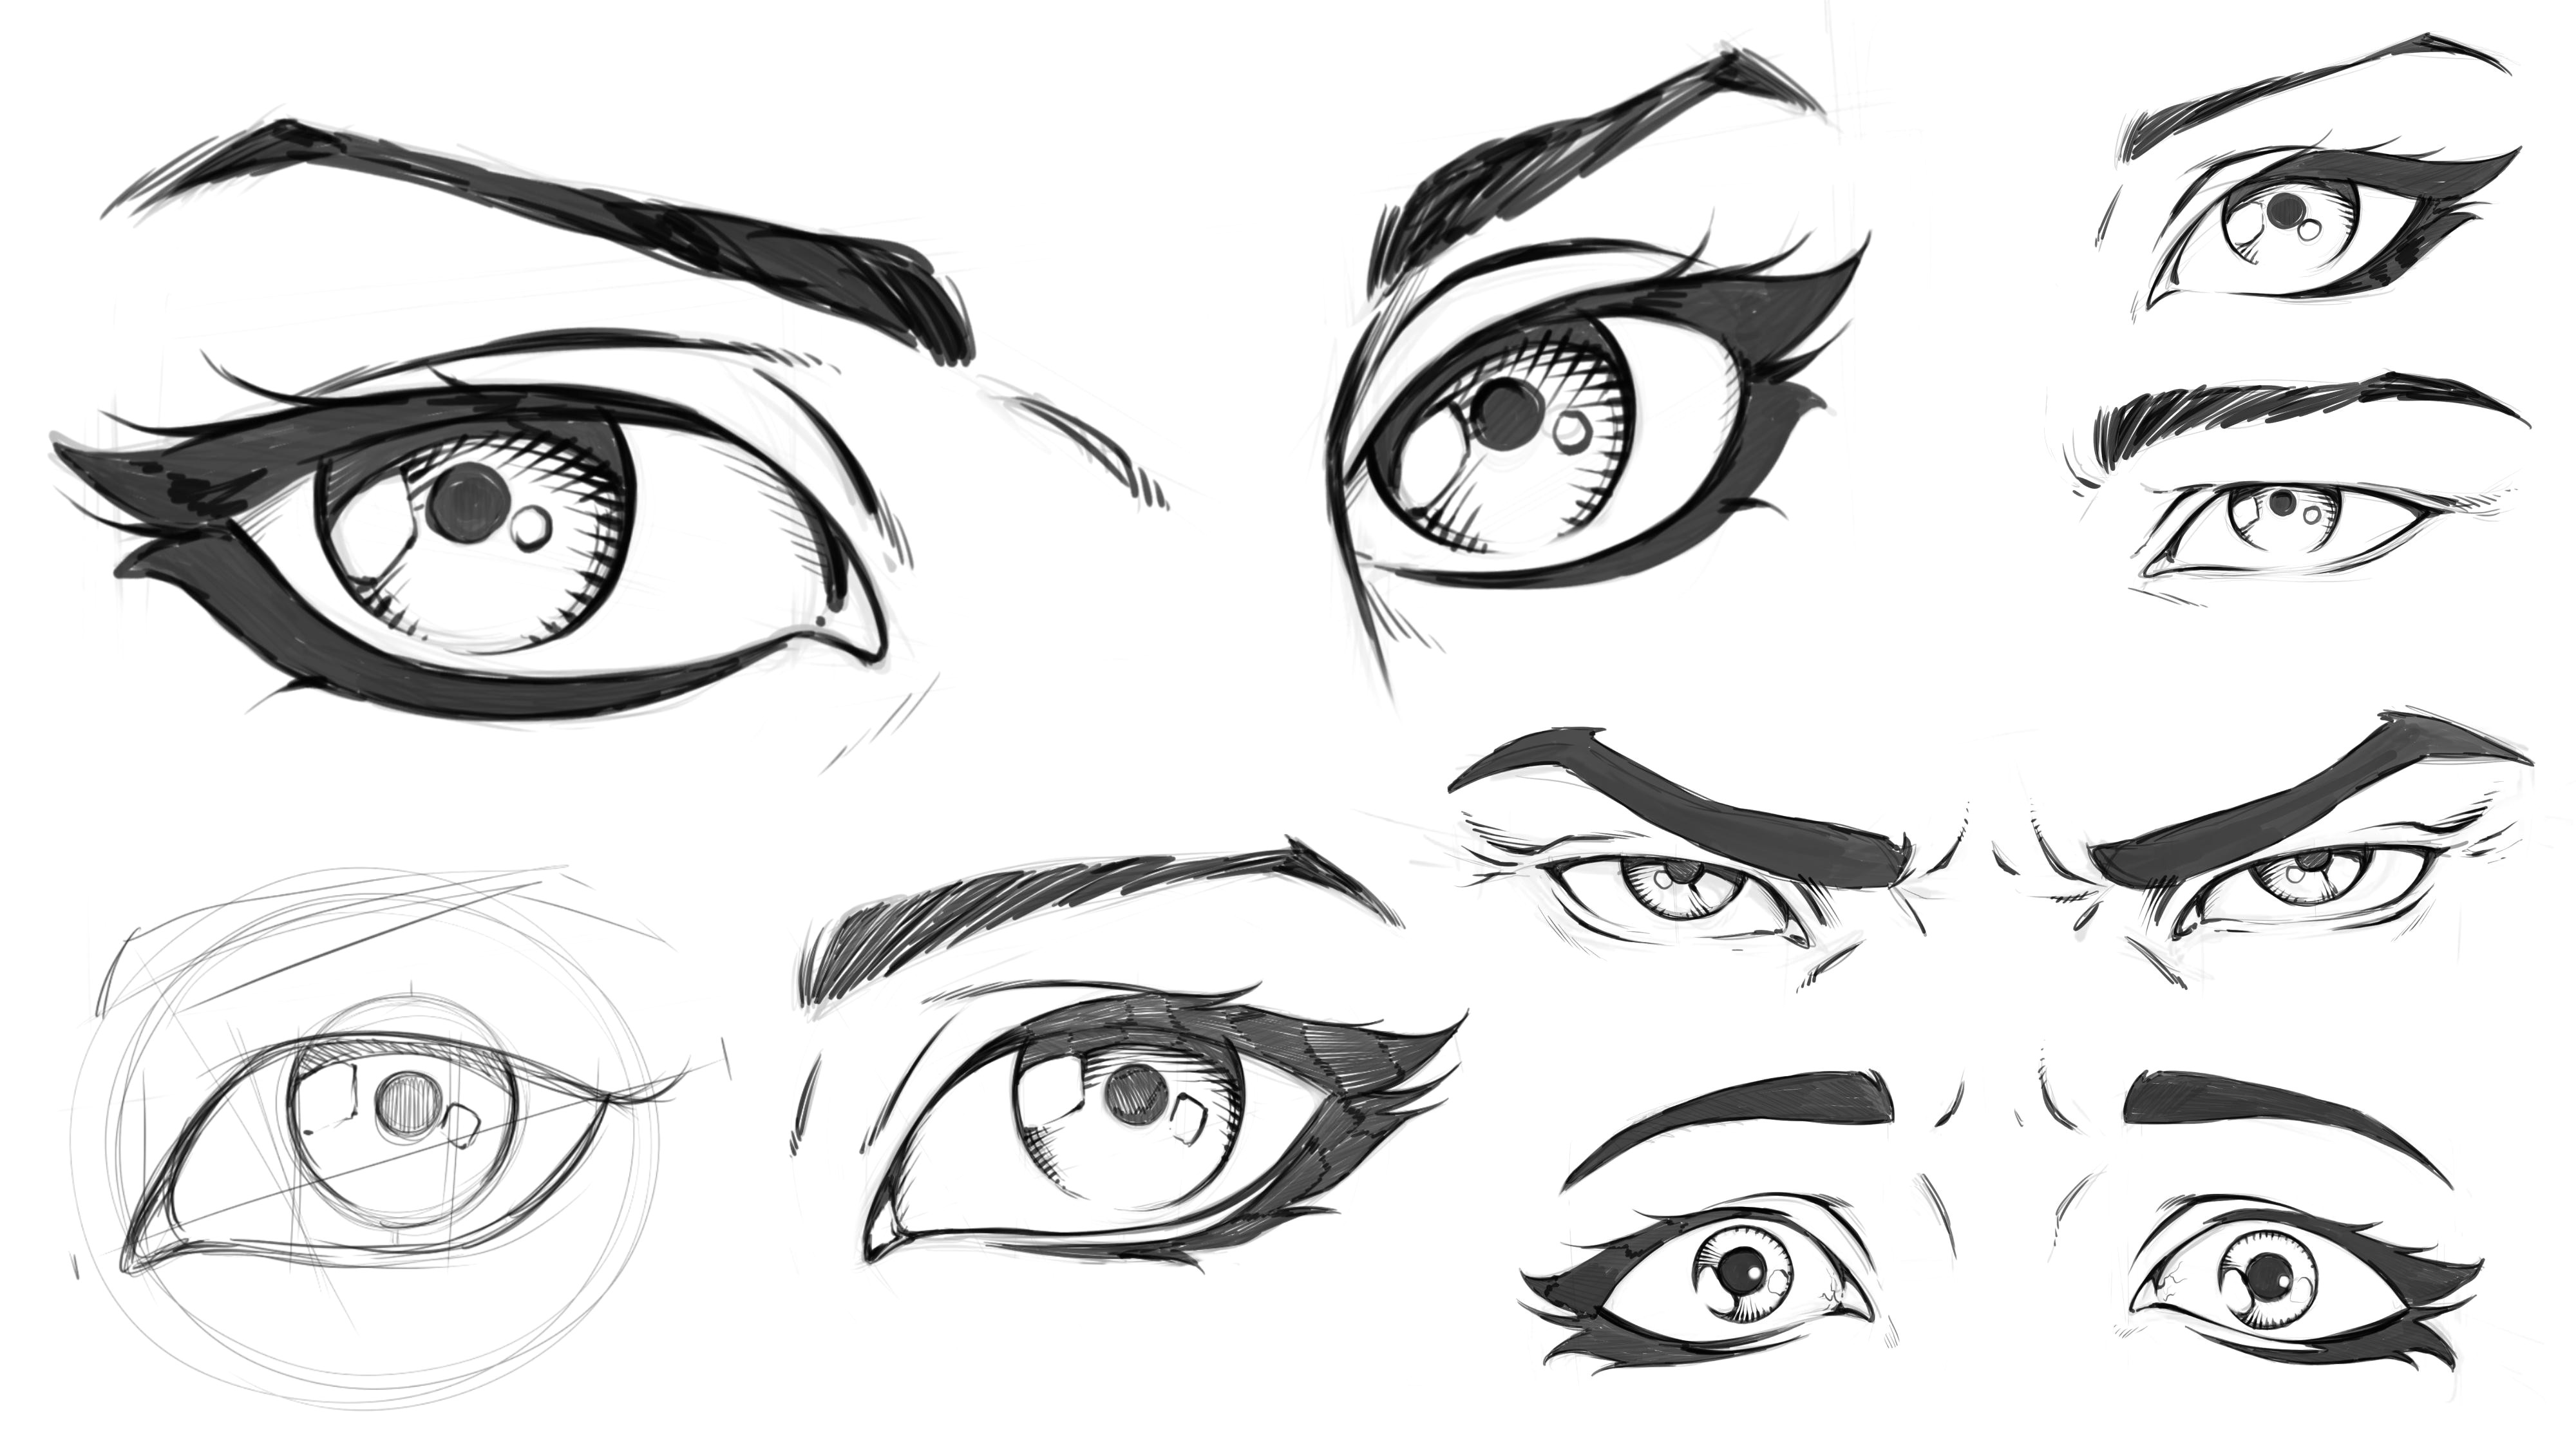 Drawing An Eye Lesson Plan How to Draw Comic Style Eyes Step by Step Robert Marzullo